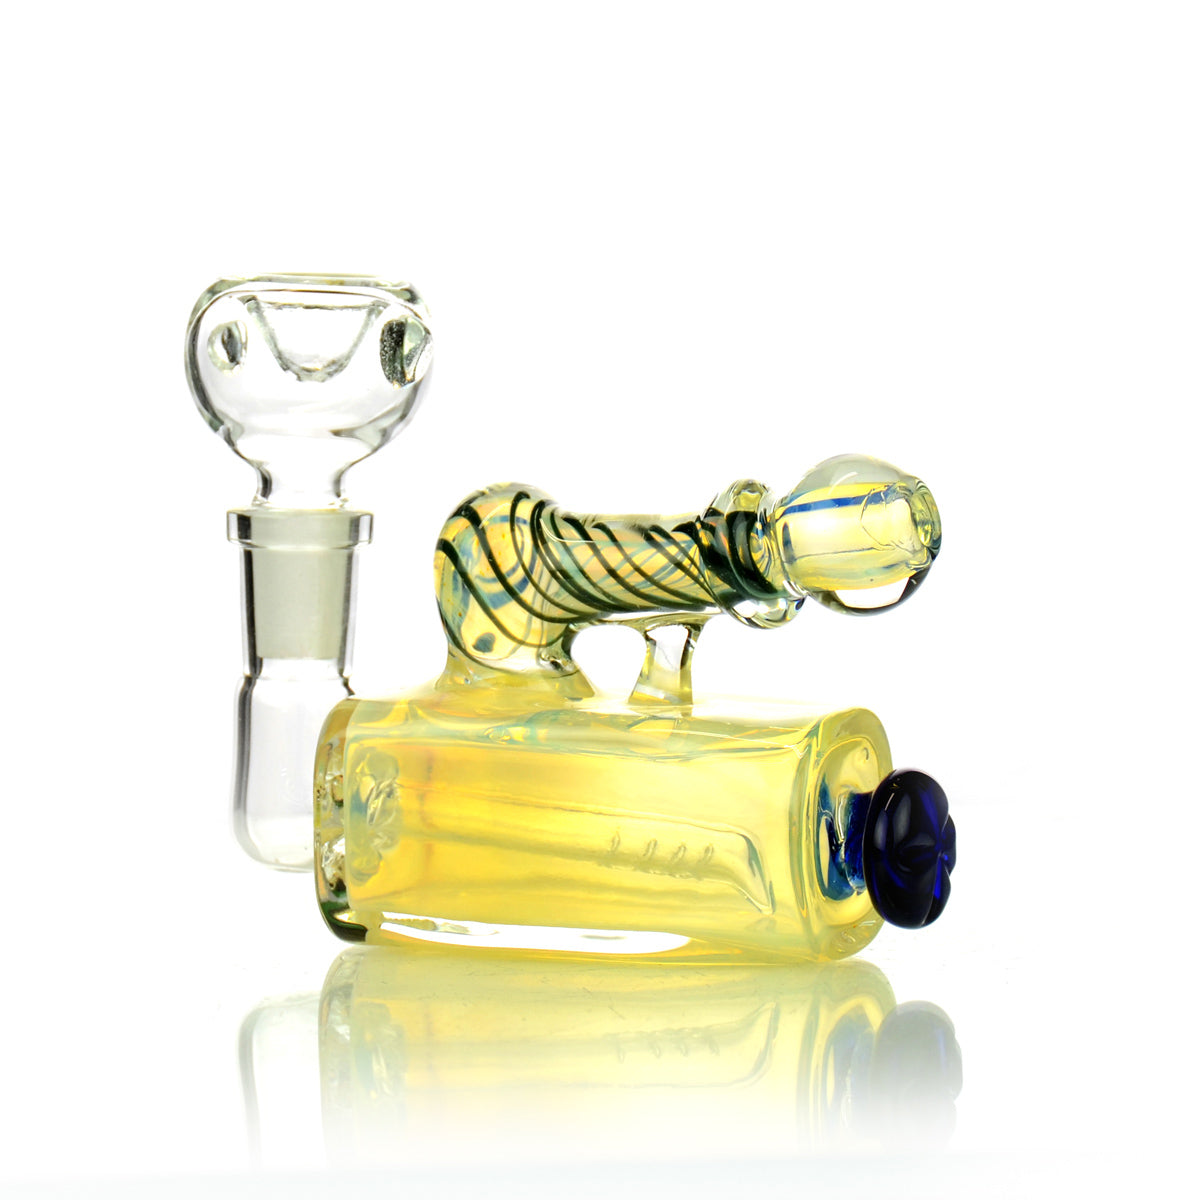 5'' Square Body Water PIPE with 14mm Male Bowl